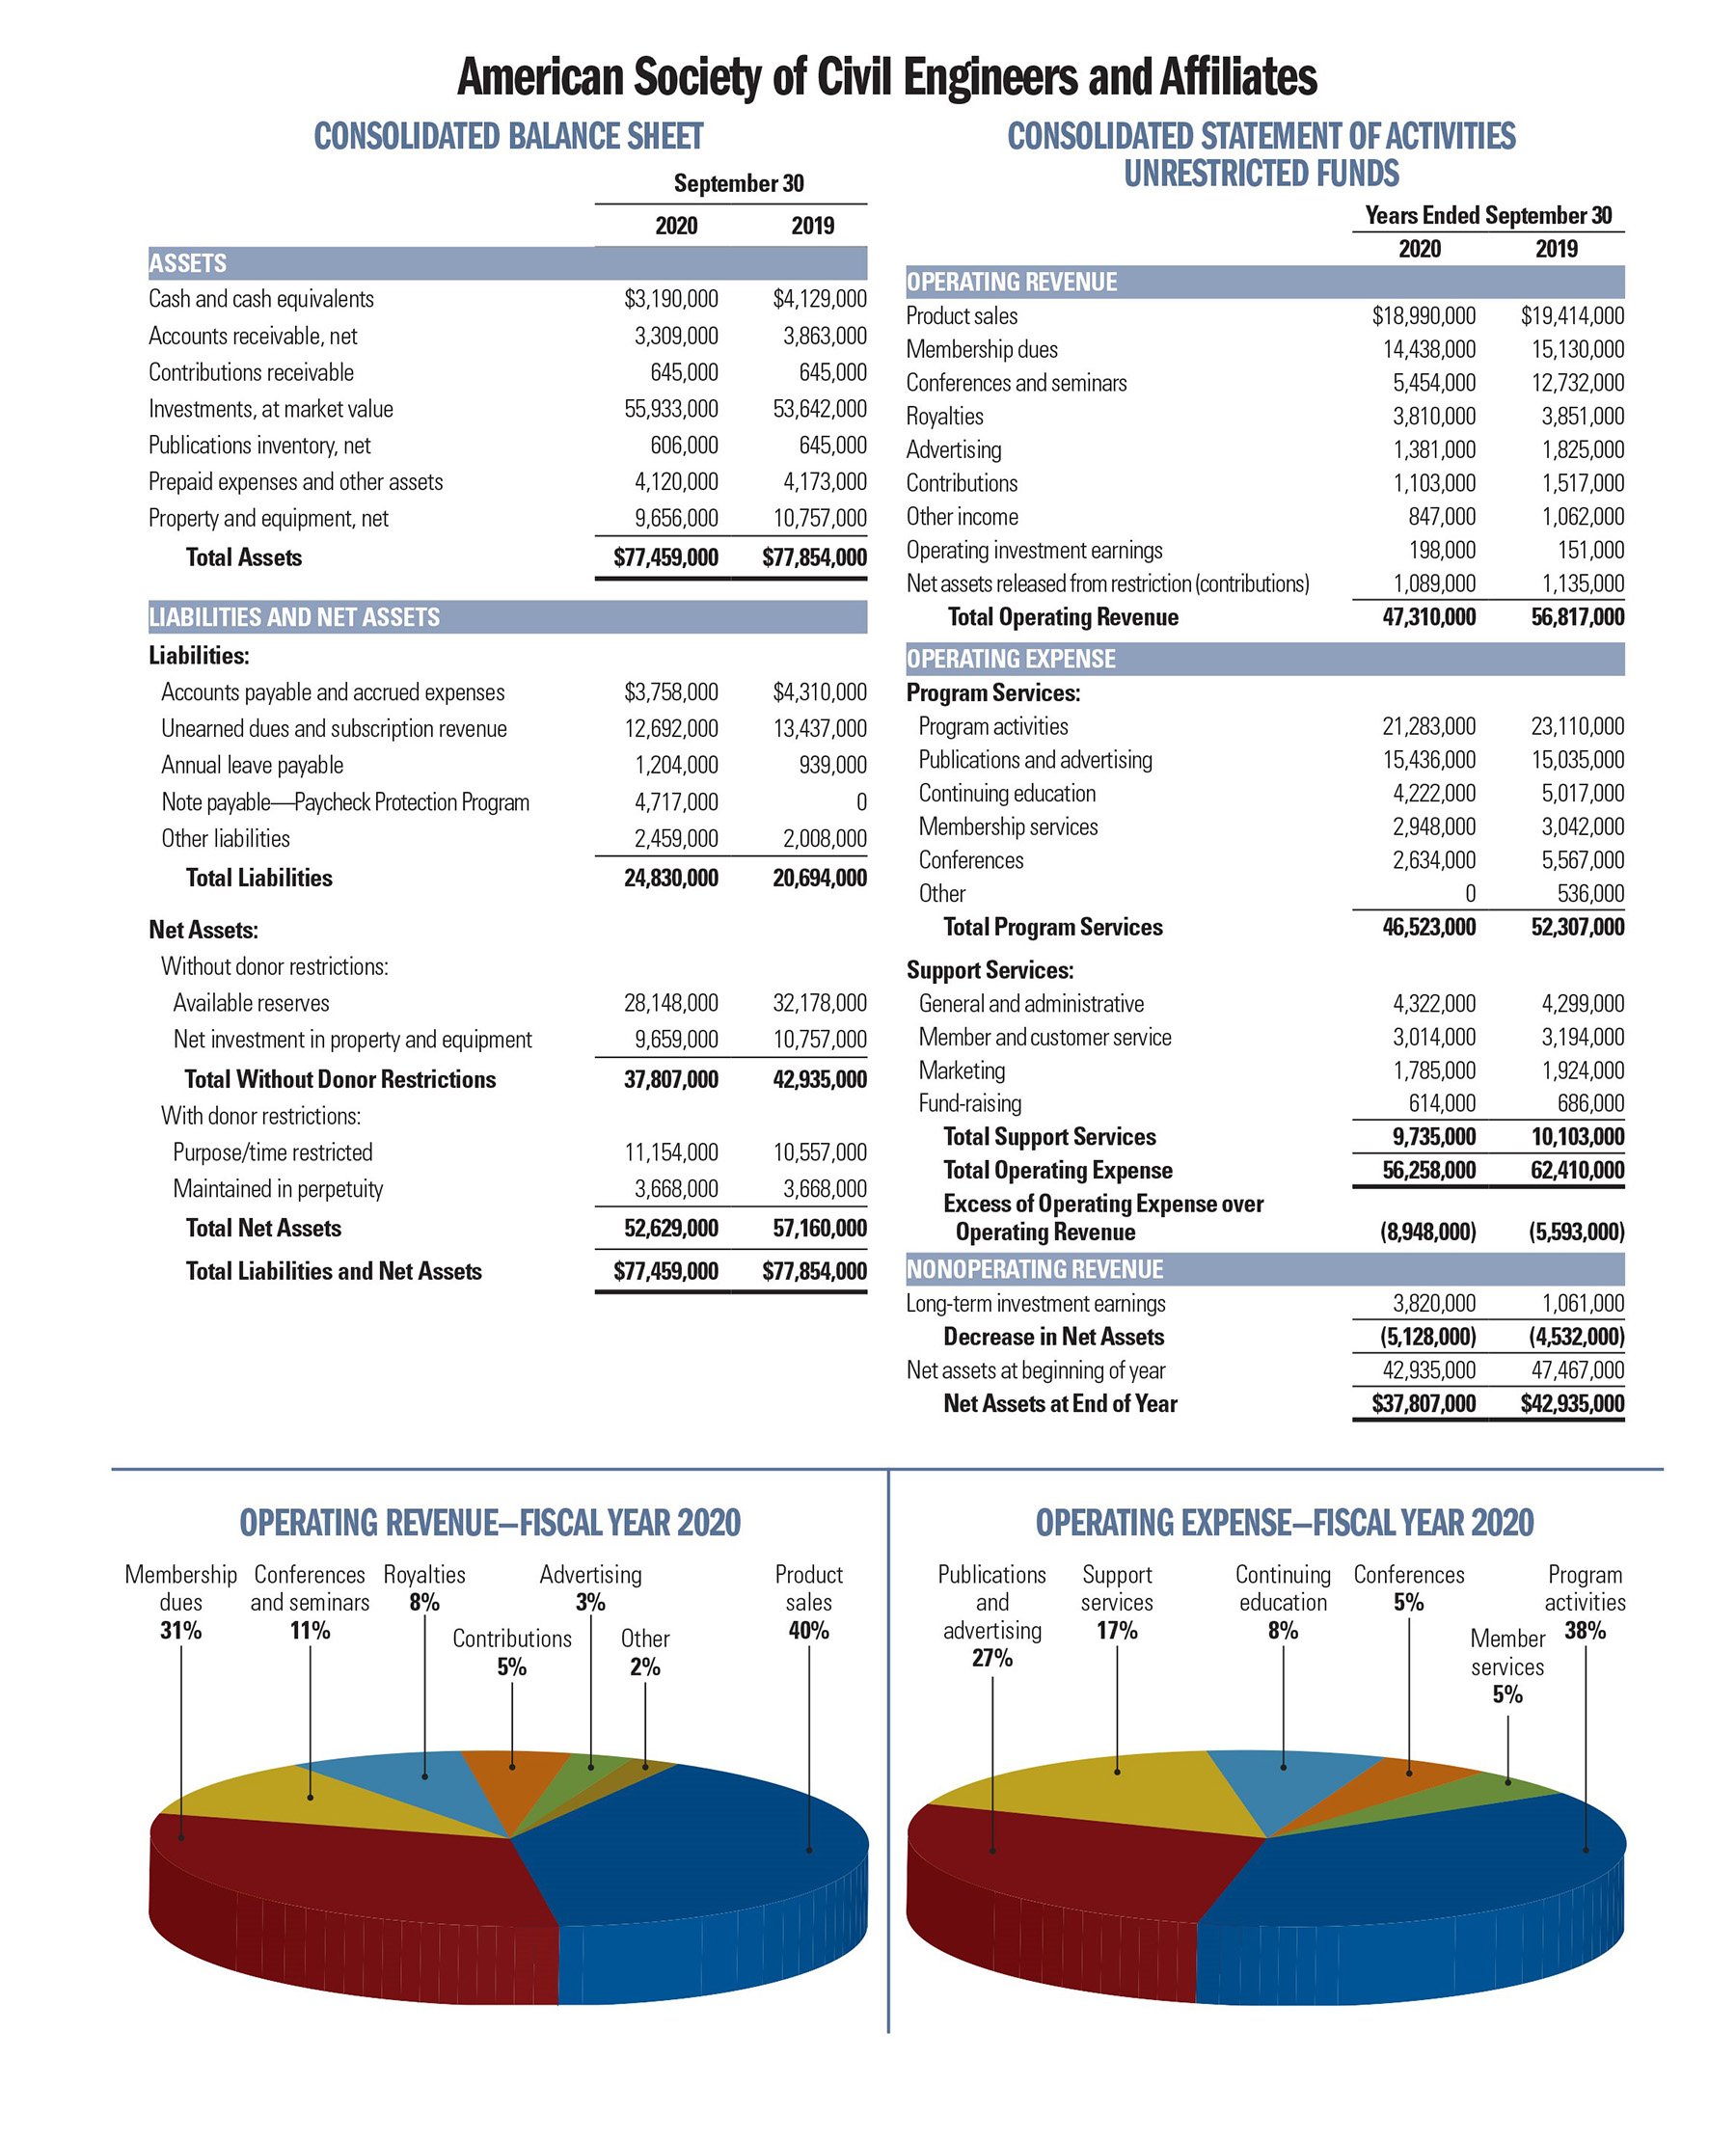 balance sheet and activities of unrestricted funds